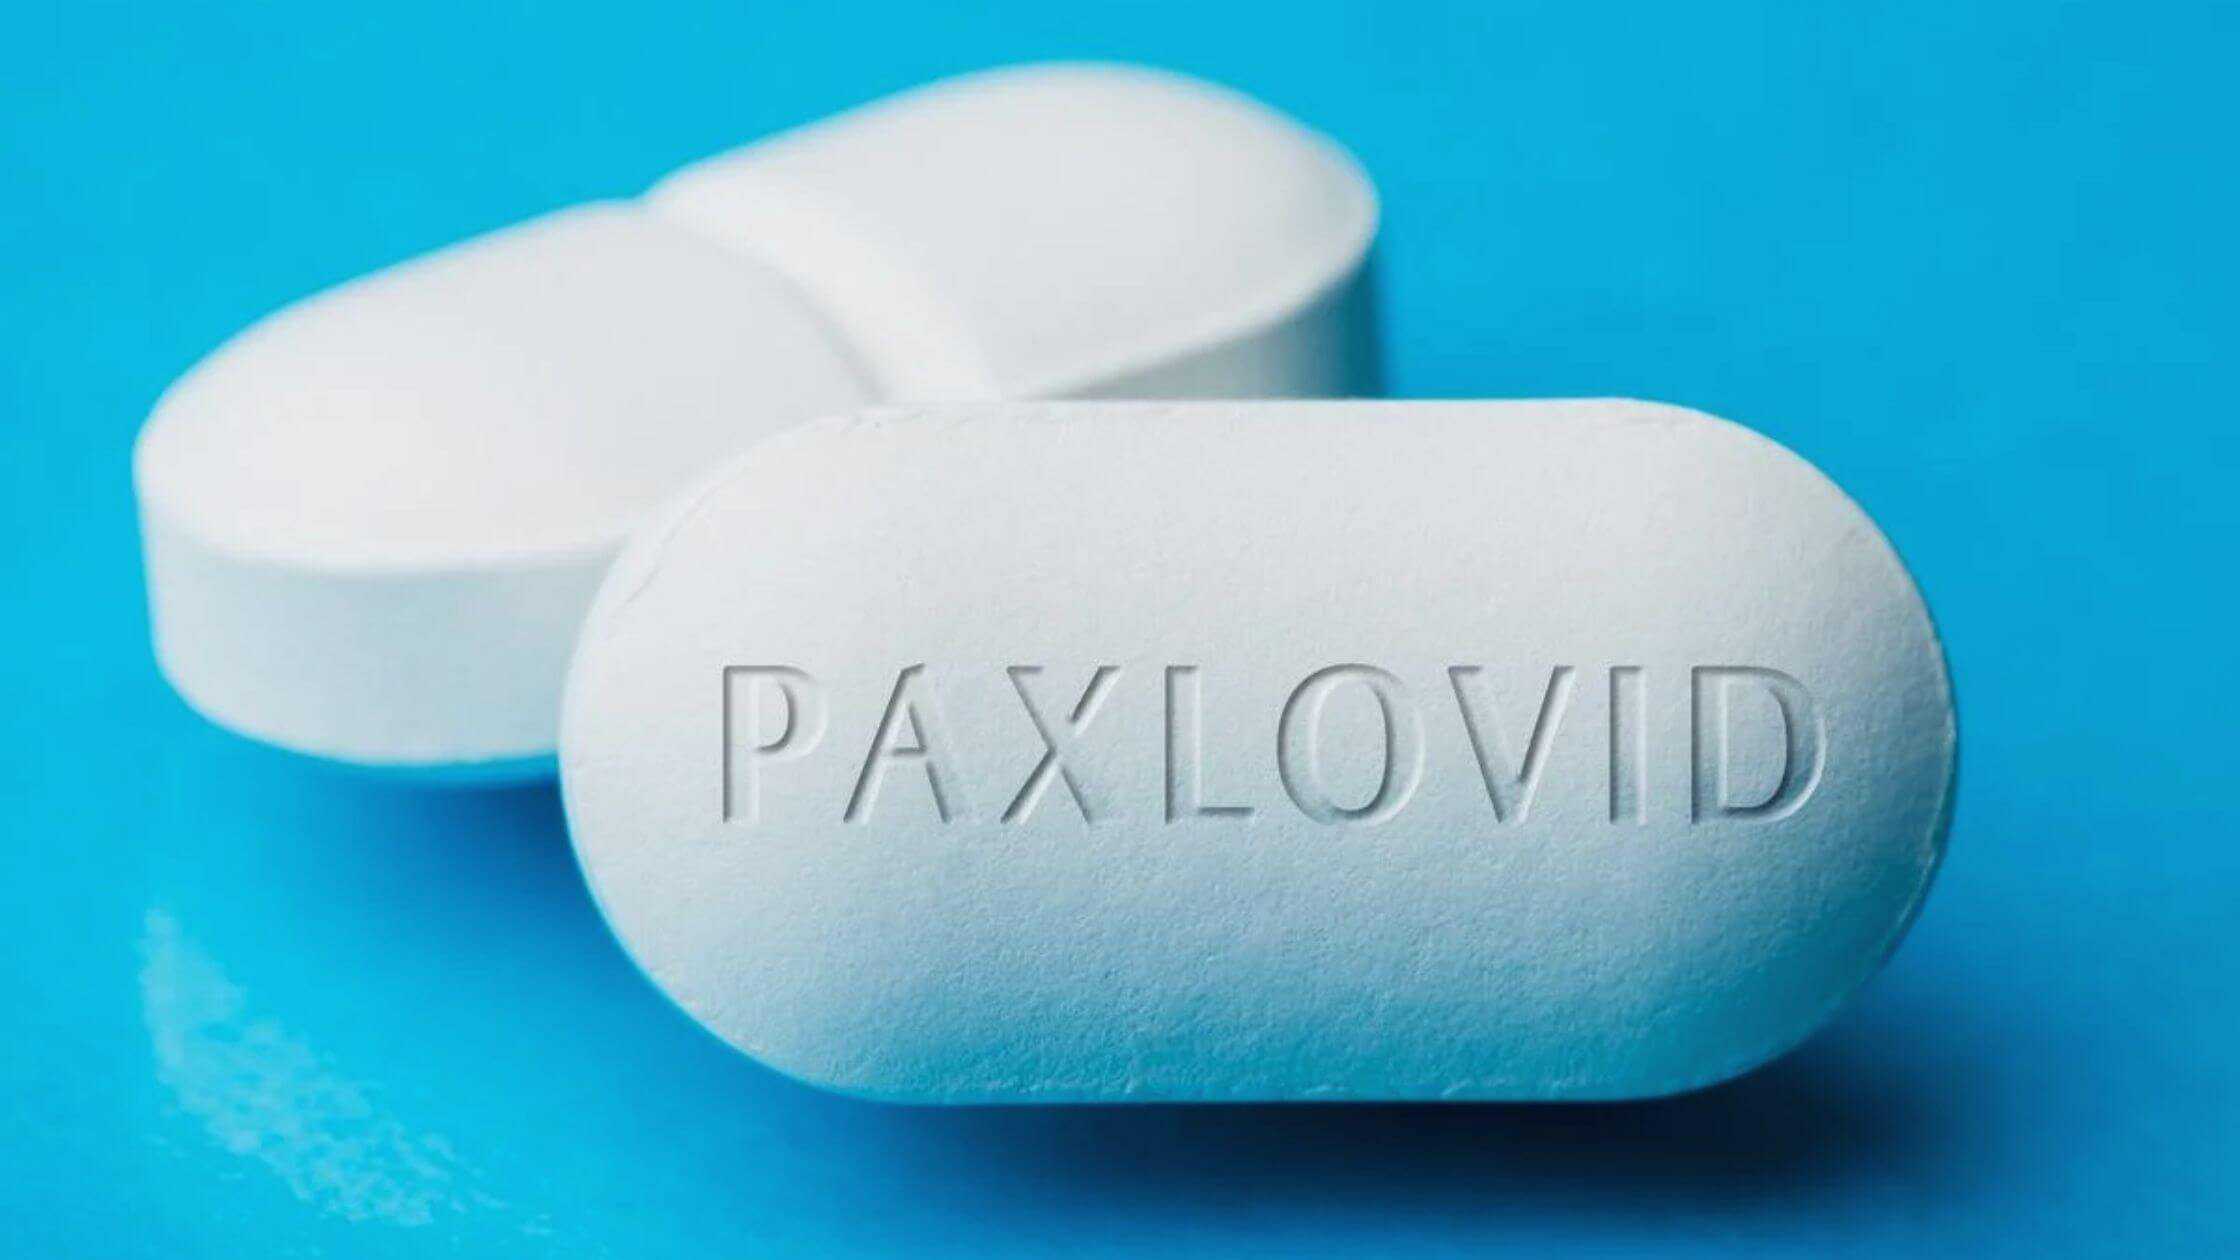 Who Gains From Using COVID Antiviral? Research On Paxlovid Found